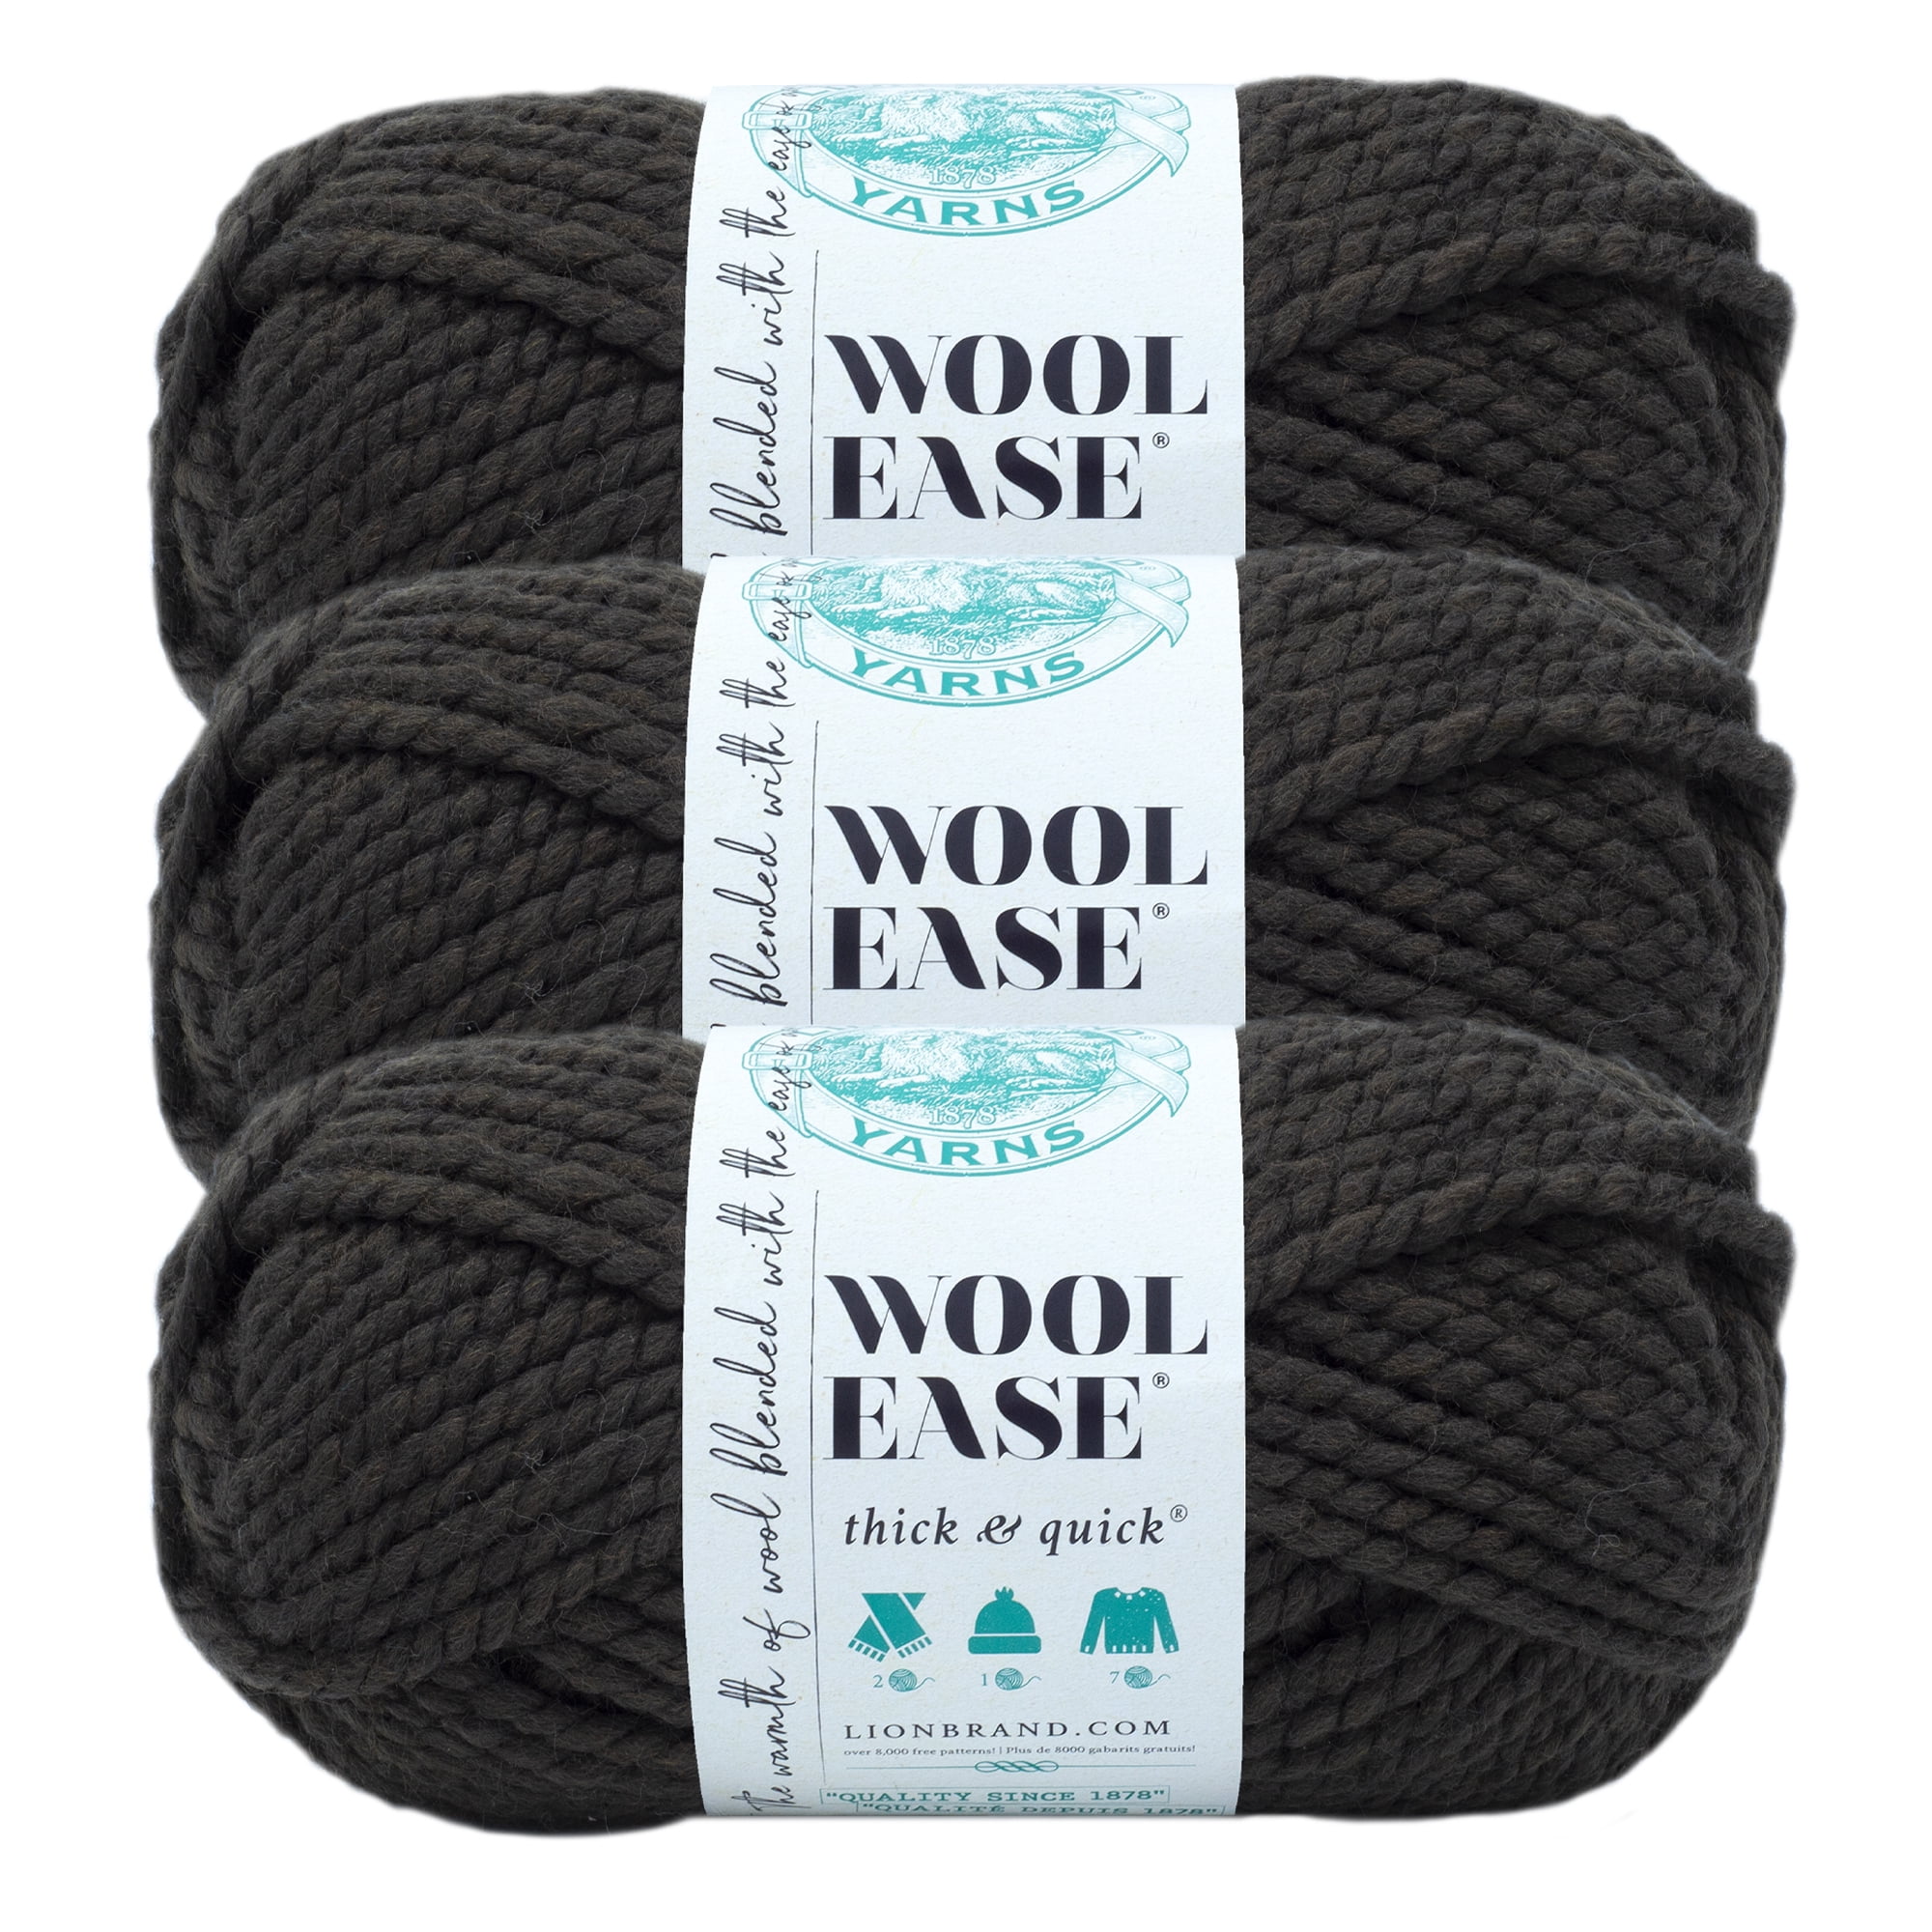 Lion Brand Yarn Wool-Ease Thick & Quick Yarn, Soft  